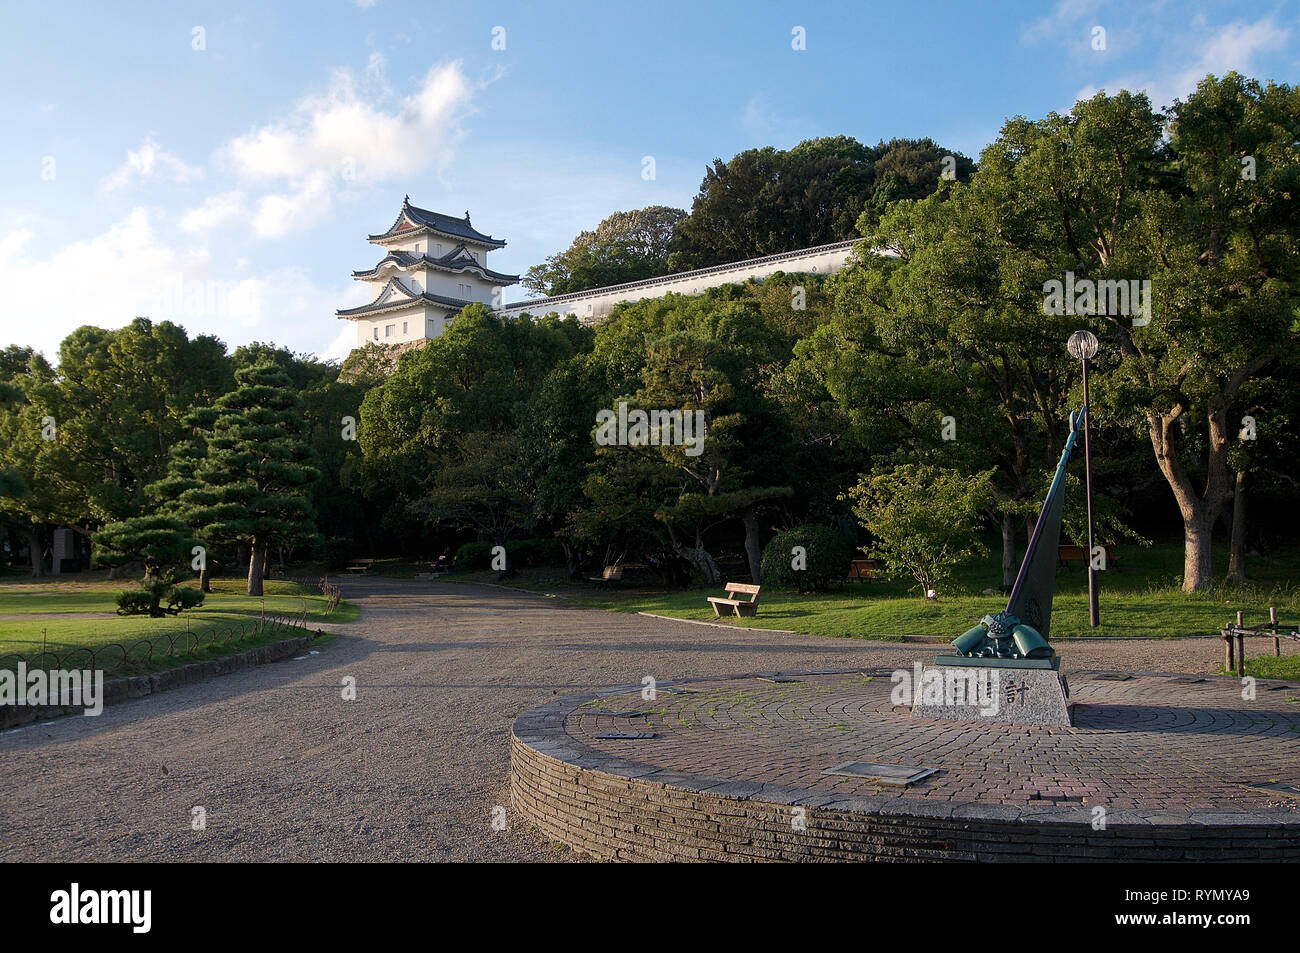 AKASHI, KANSAI, JAPAN - 6th OCTOBER 2018 : View of the Akashi castle and of the surrounding park, with a monument in the foreground in Akashi, Japan Stock Photo